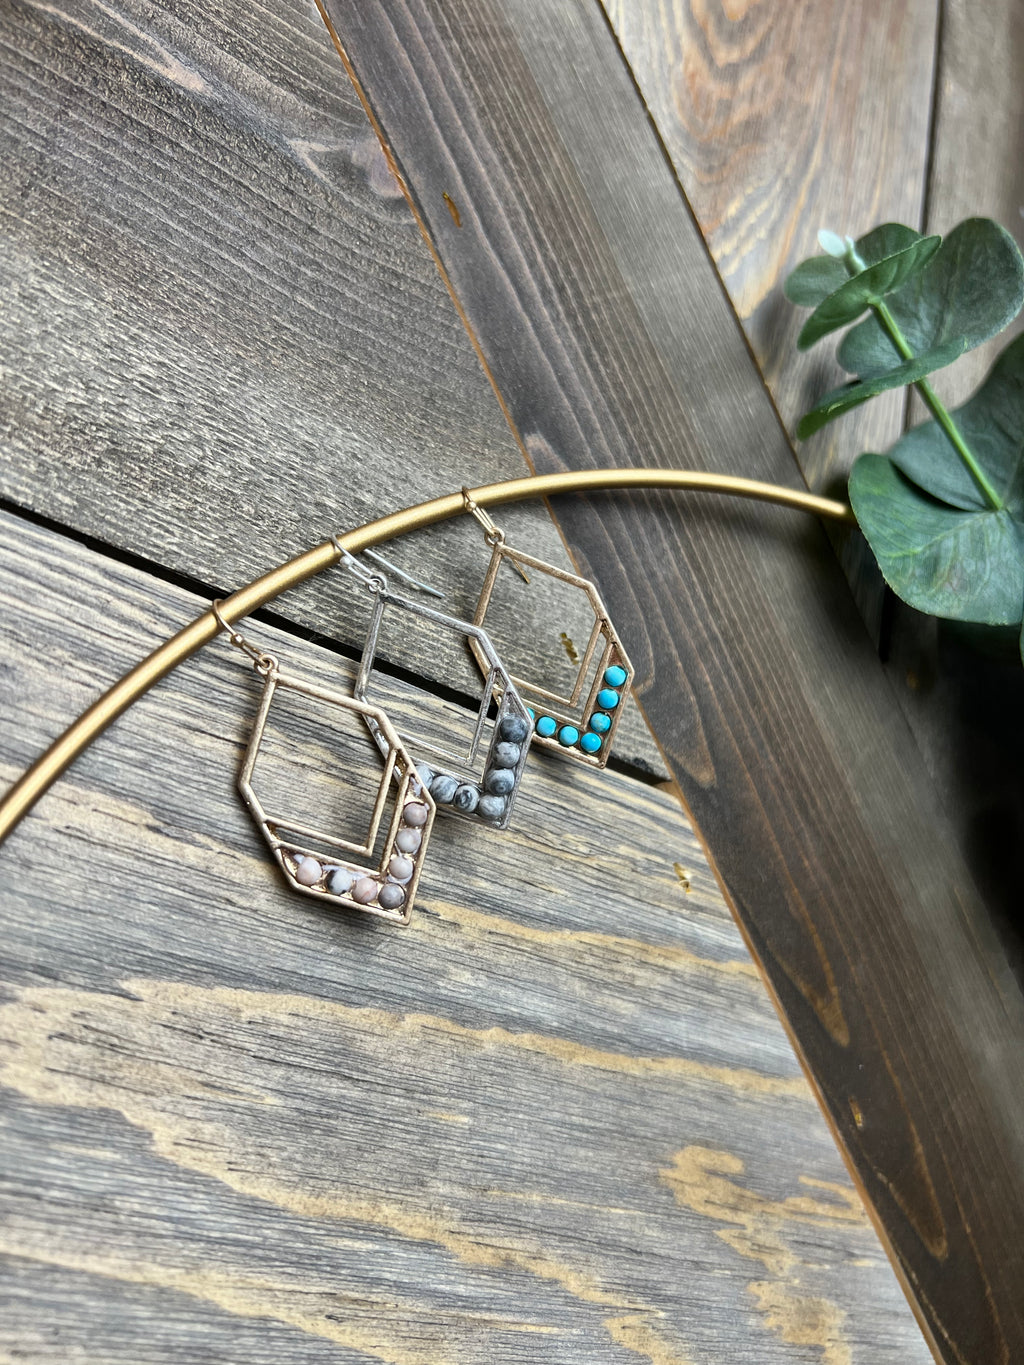 Chevron-Shaped Drop Earrings Featuring Natural Stone Beads